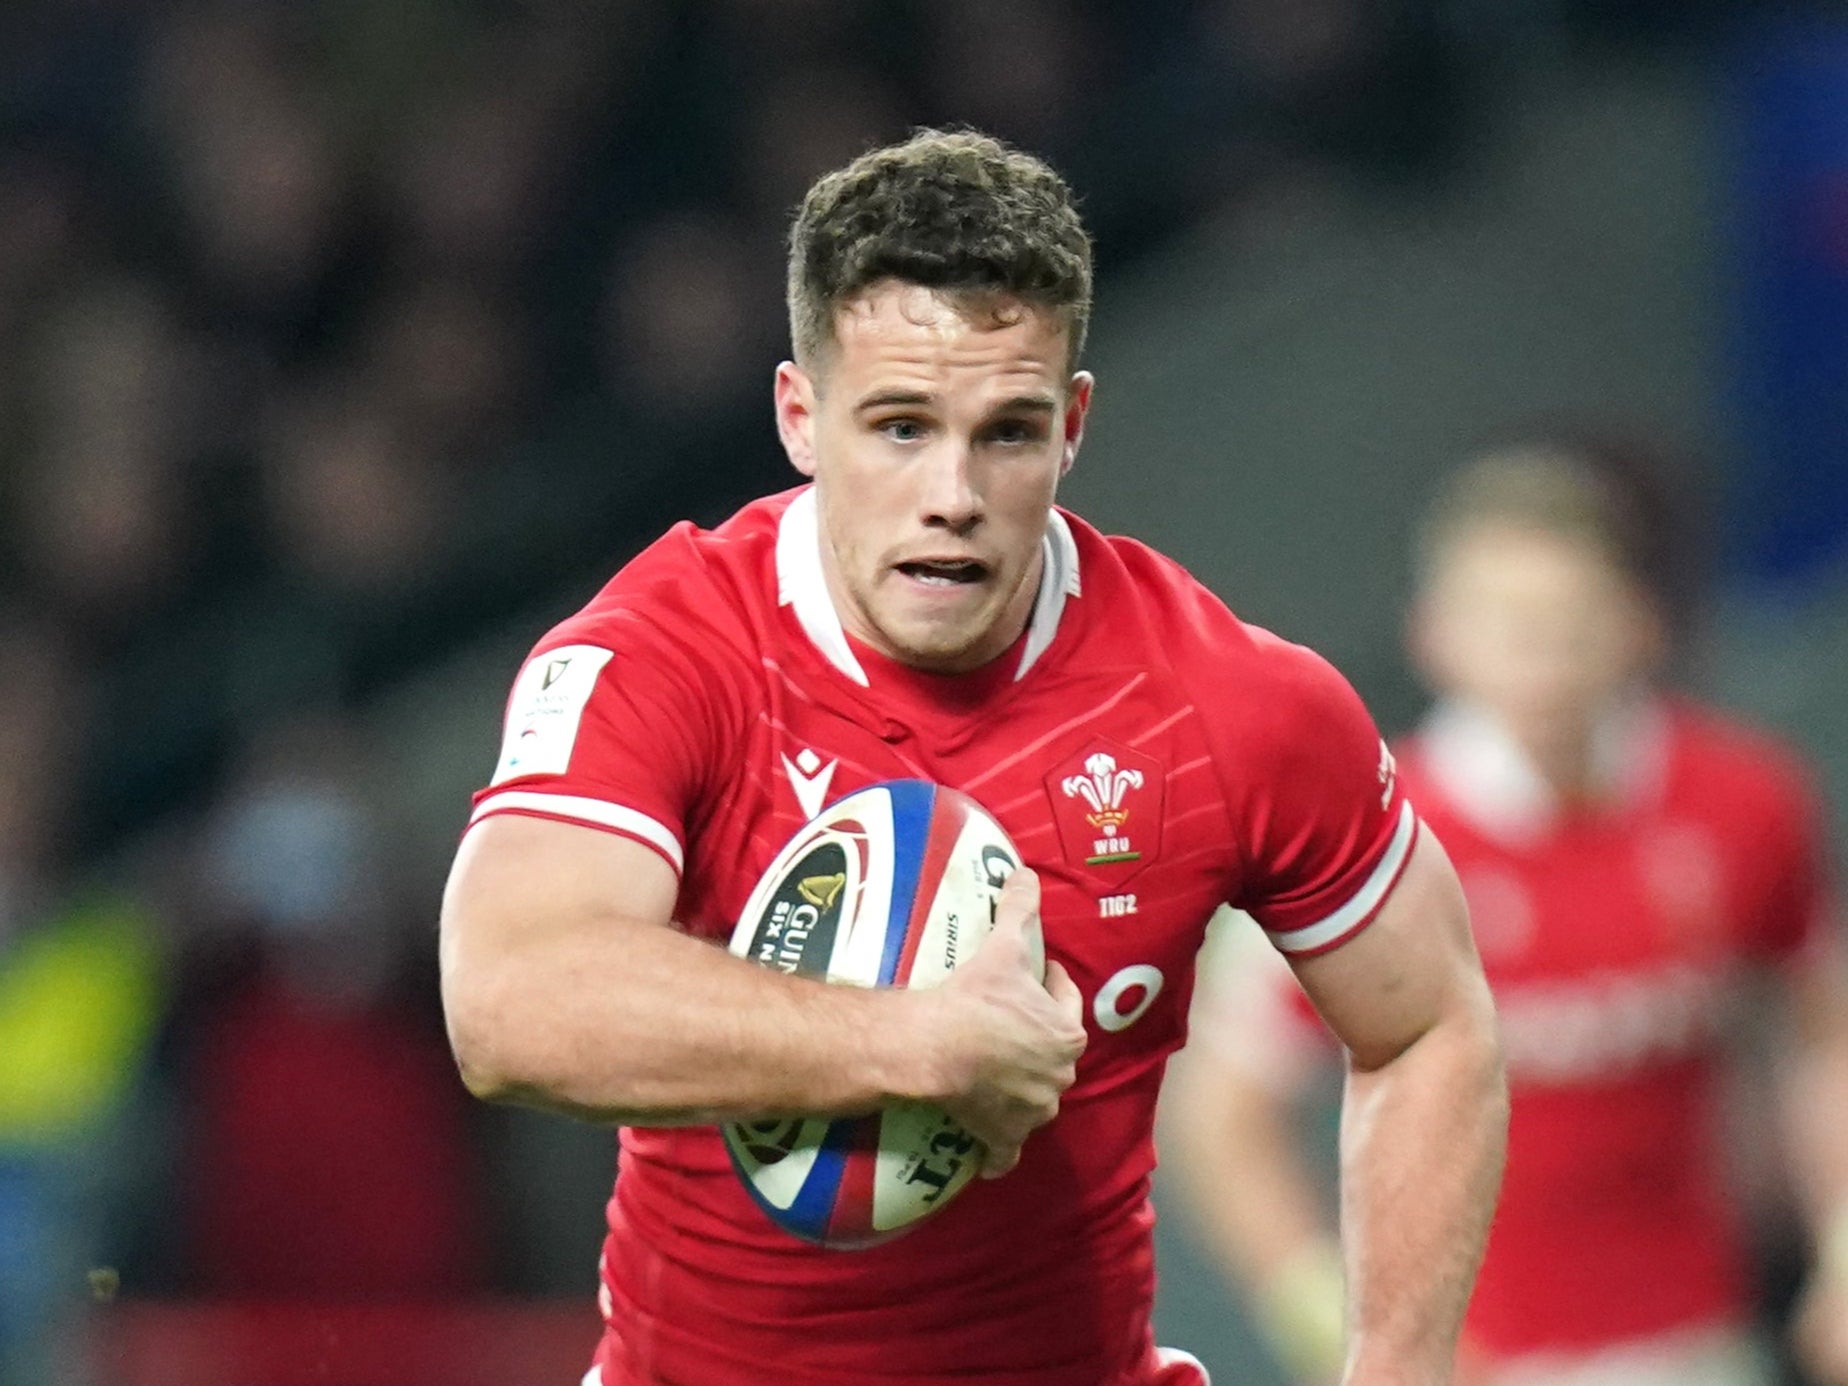 Kieran Hardy played a key role in Wales pushing France to the limit